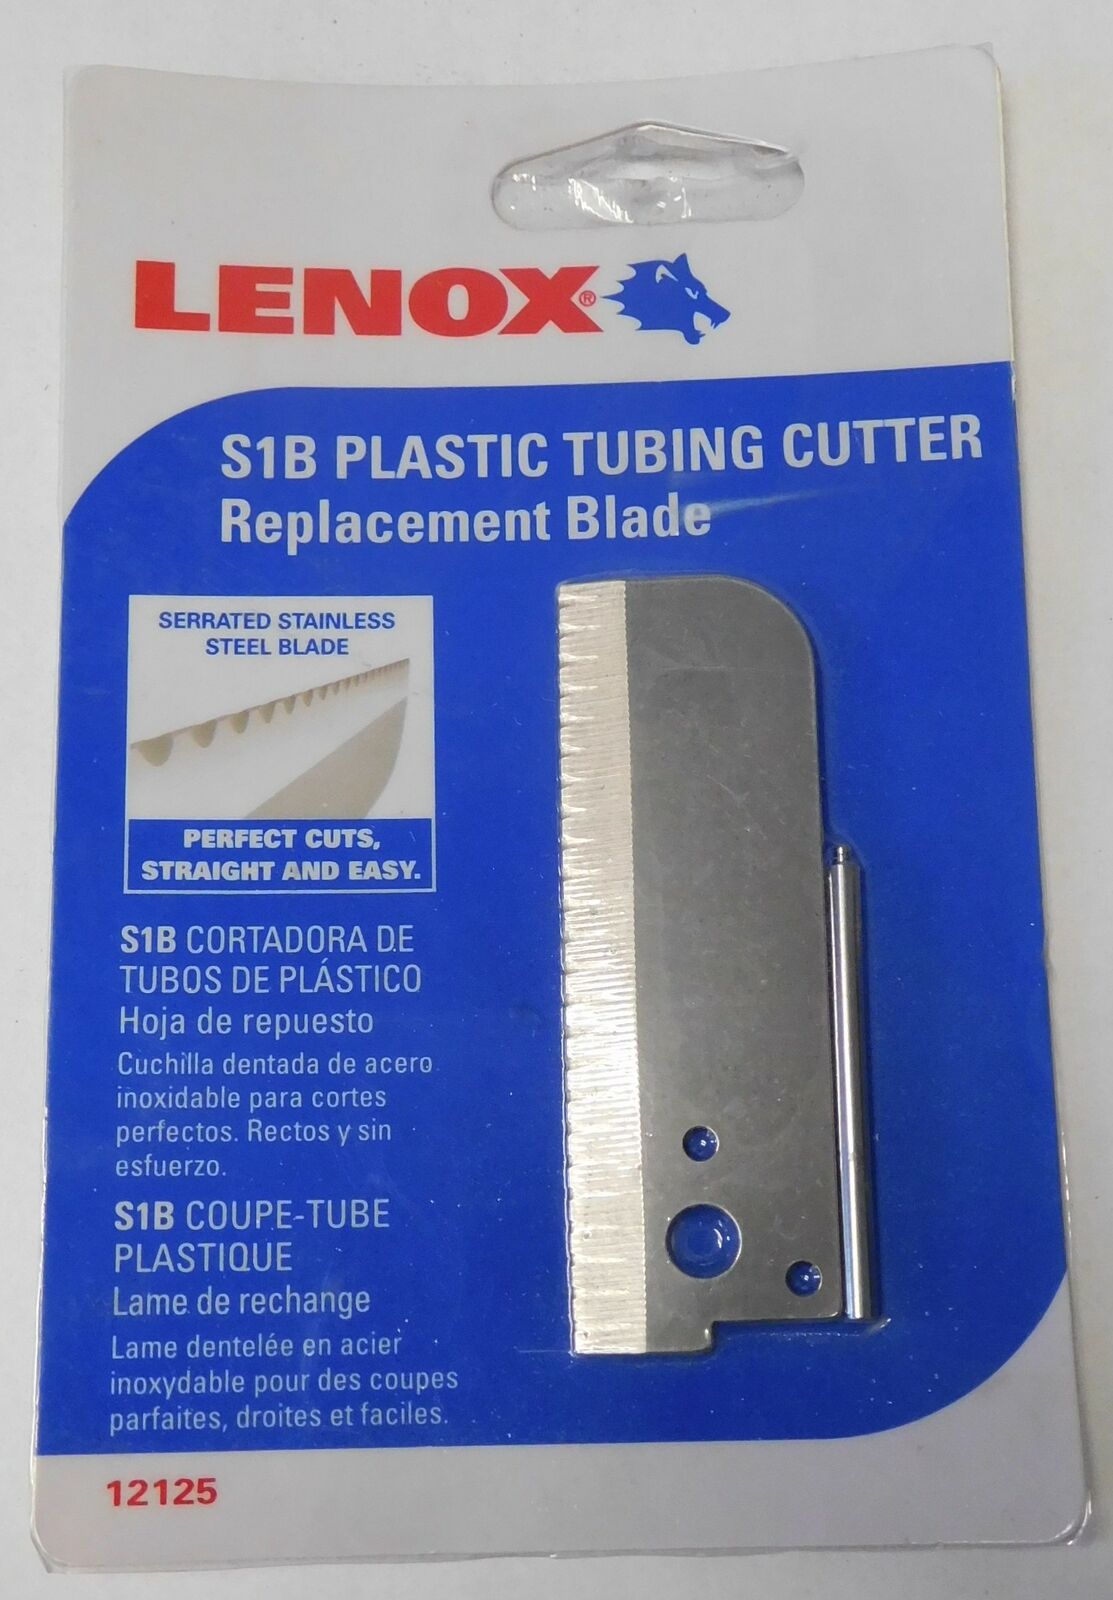 Lenox 12125 S1B Plastic Tubing Cutter Replacement Blade